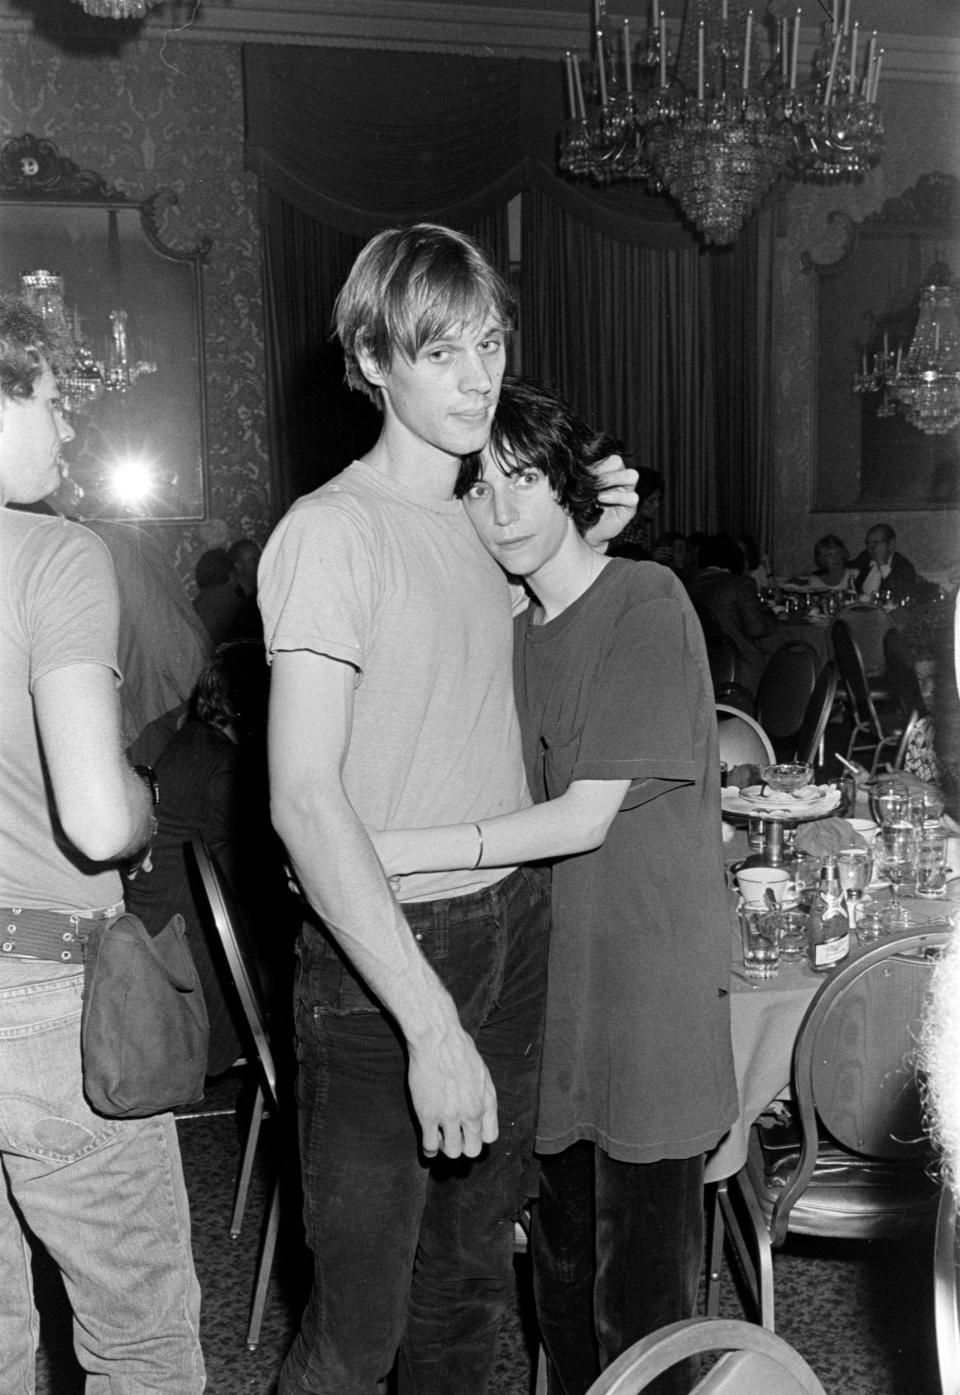 Verlaine with Patti Smith at a party in New York in 1974 - Pierre Schermann/WWD/Penske Media via Getty Images